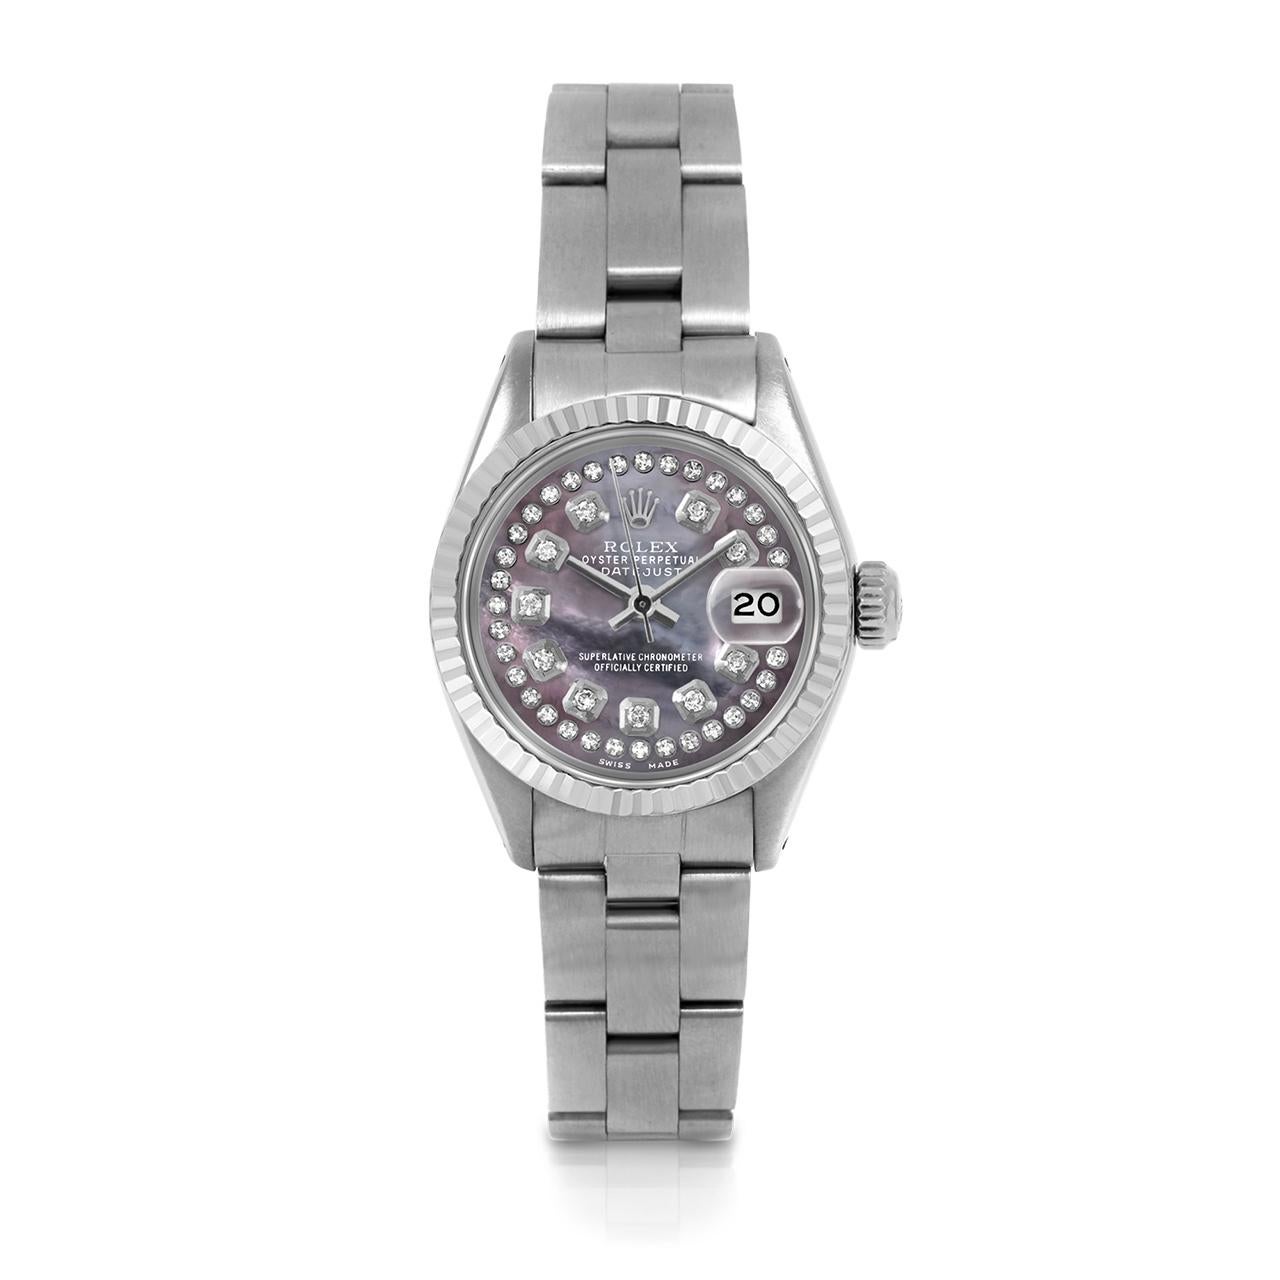 Pre-Owned Rolex 6917 Ladies 26mm Datejust Watch, Custom Black Mother of Pearl String Diamond Dial & Fluted Bezel on Rolex Stainless Steel Oyster Band.   

SKU 6917-SS-BMOP-STRD-FLT-OYS


Brand/Model:        Rolex Datejust
Model Number:       